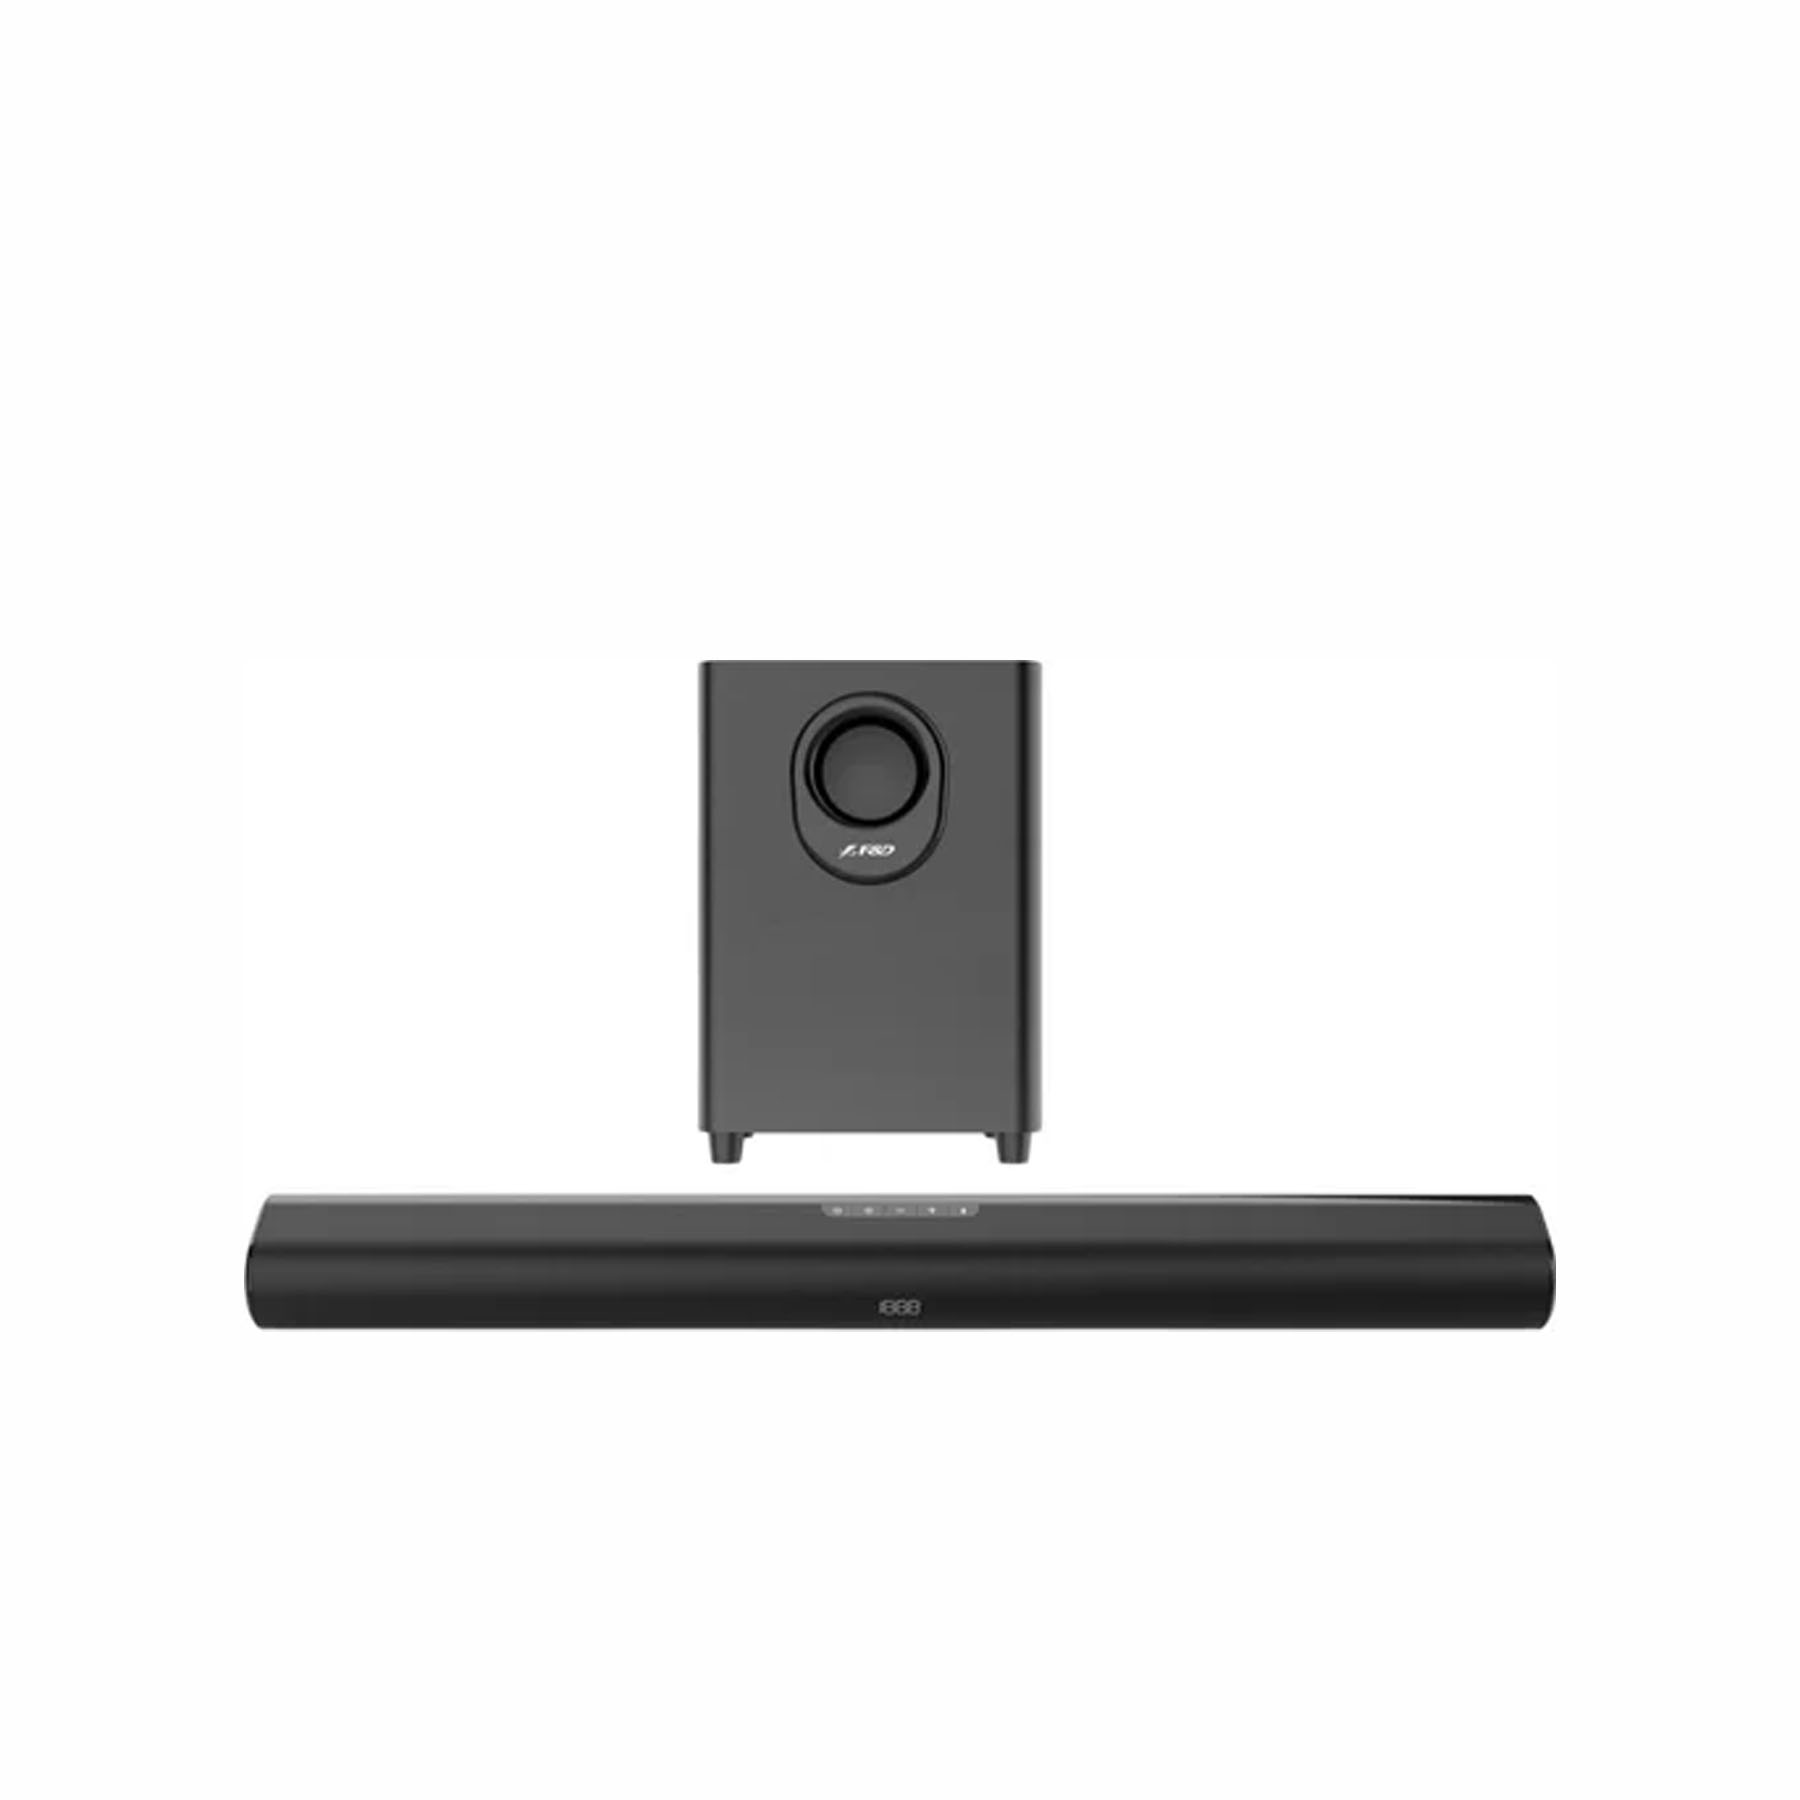 F&D HT-330 2.1 Bluetooth soundbar with Wired subwoofer 80W